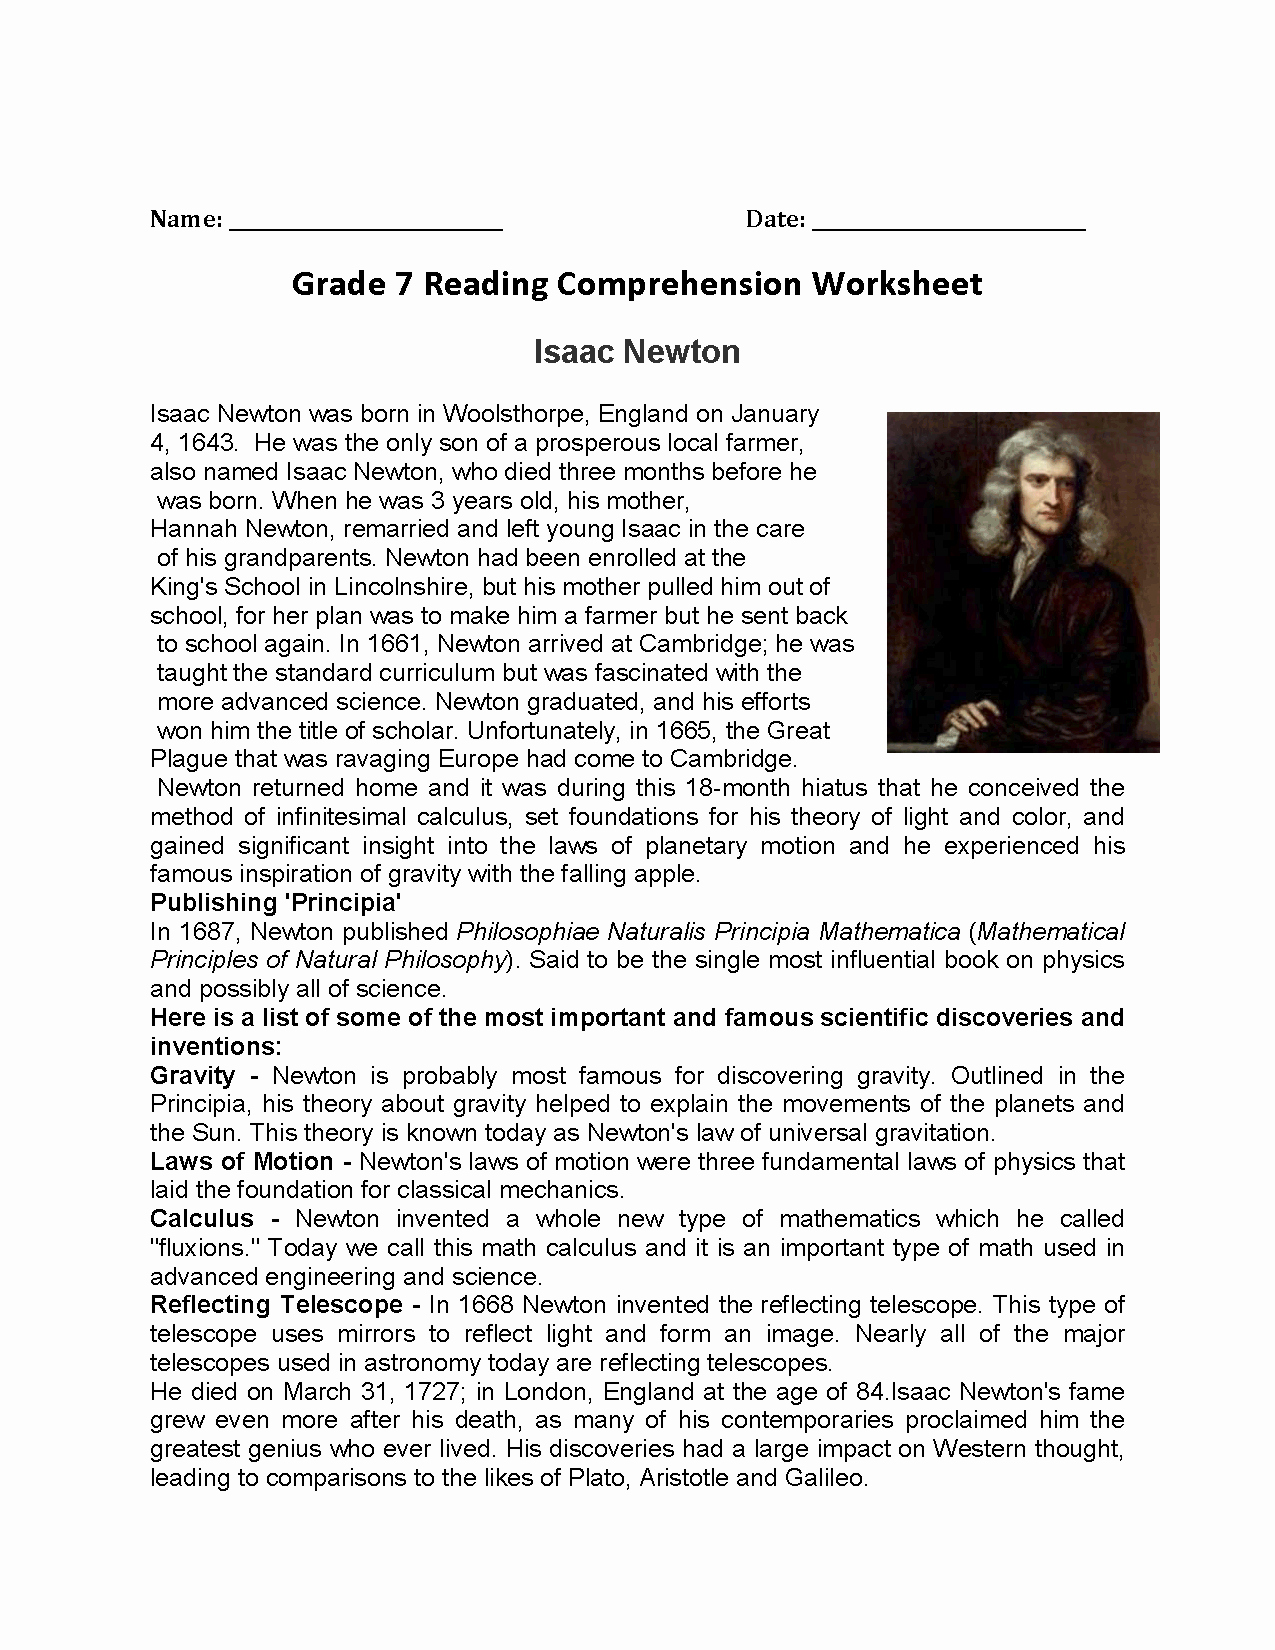 Free 7th Grade Reading Worksheets Awesome Reading Worksheets